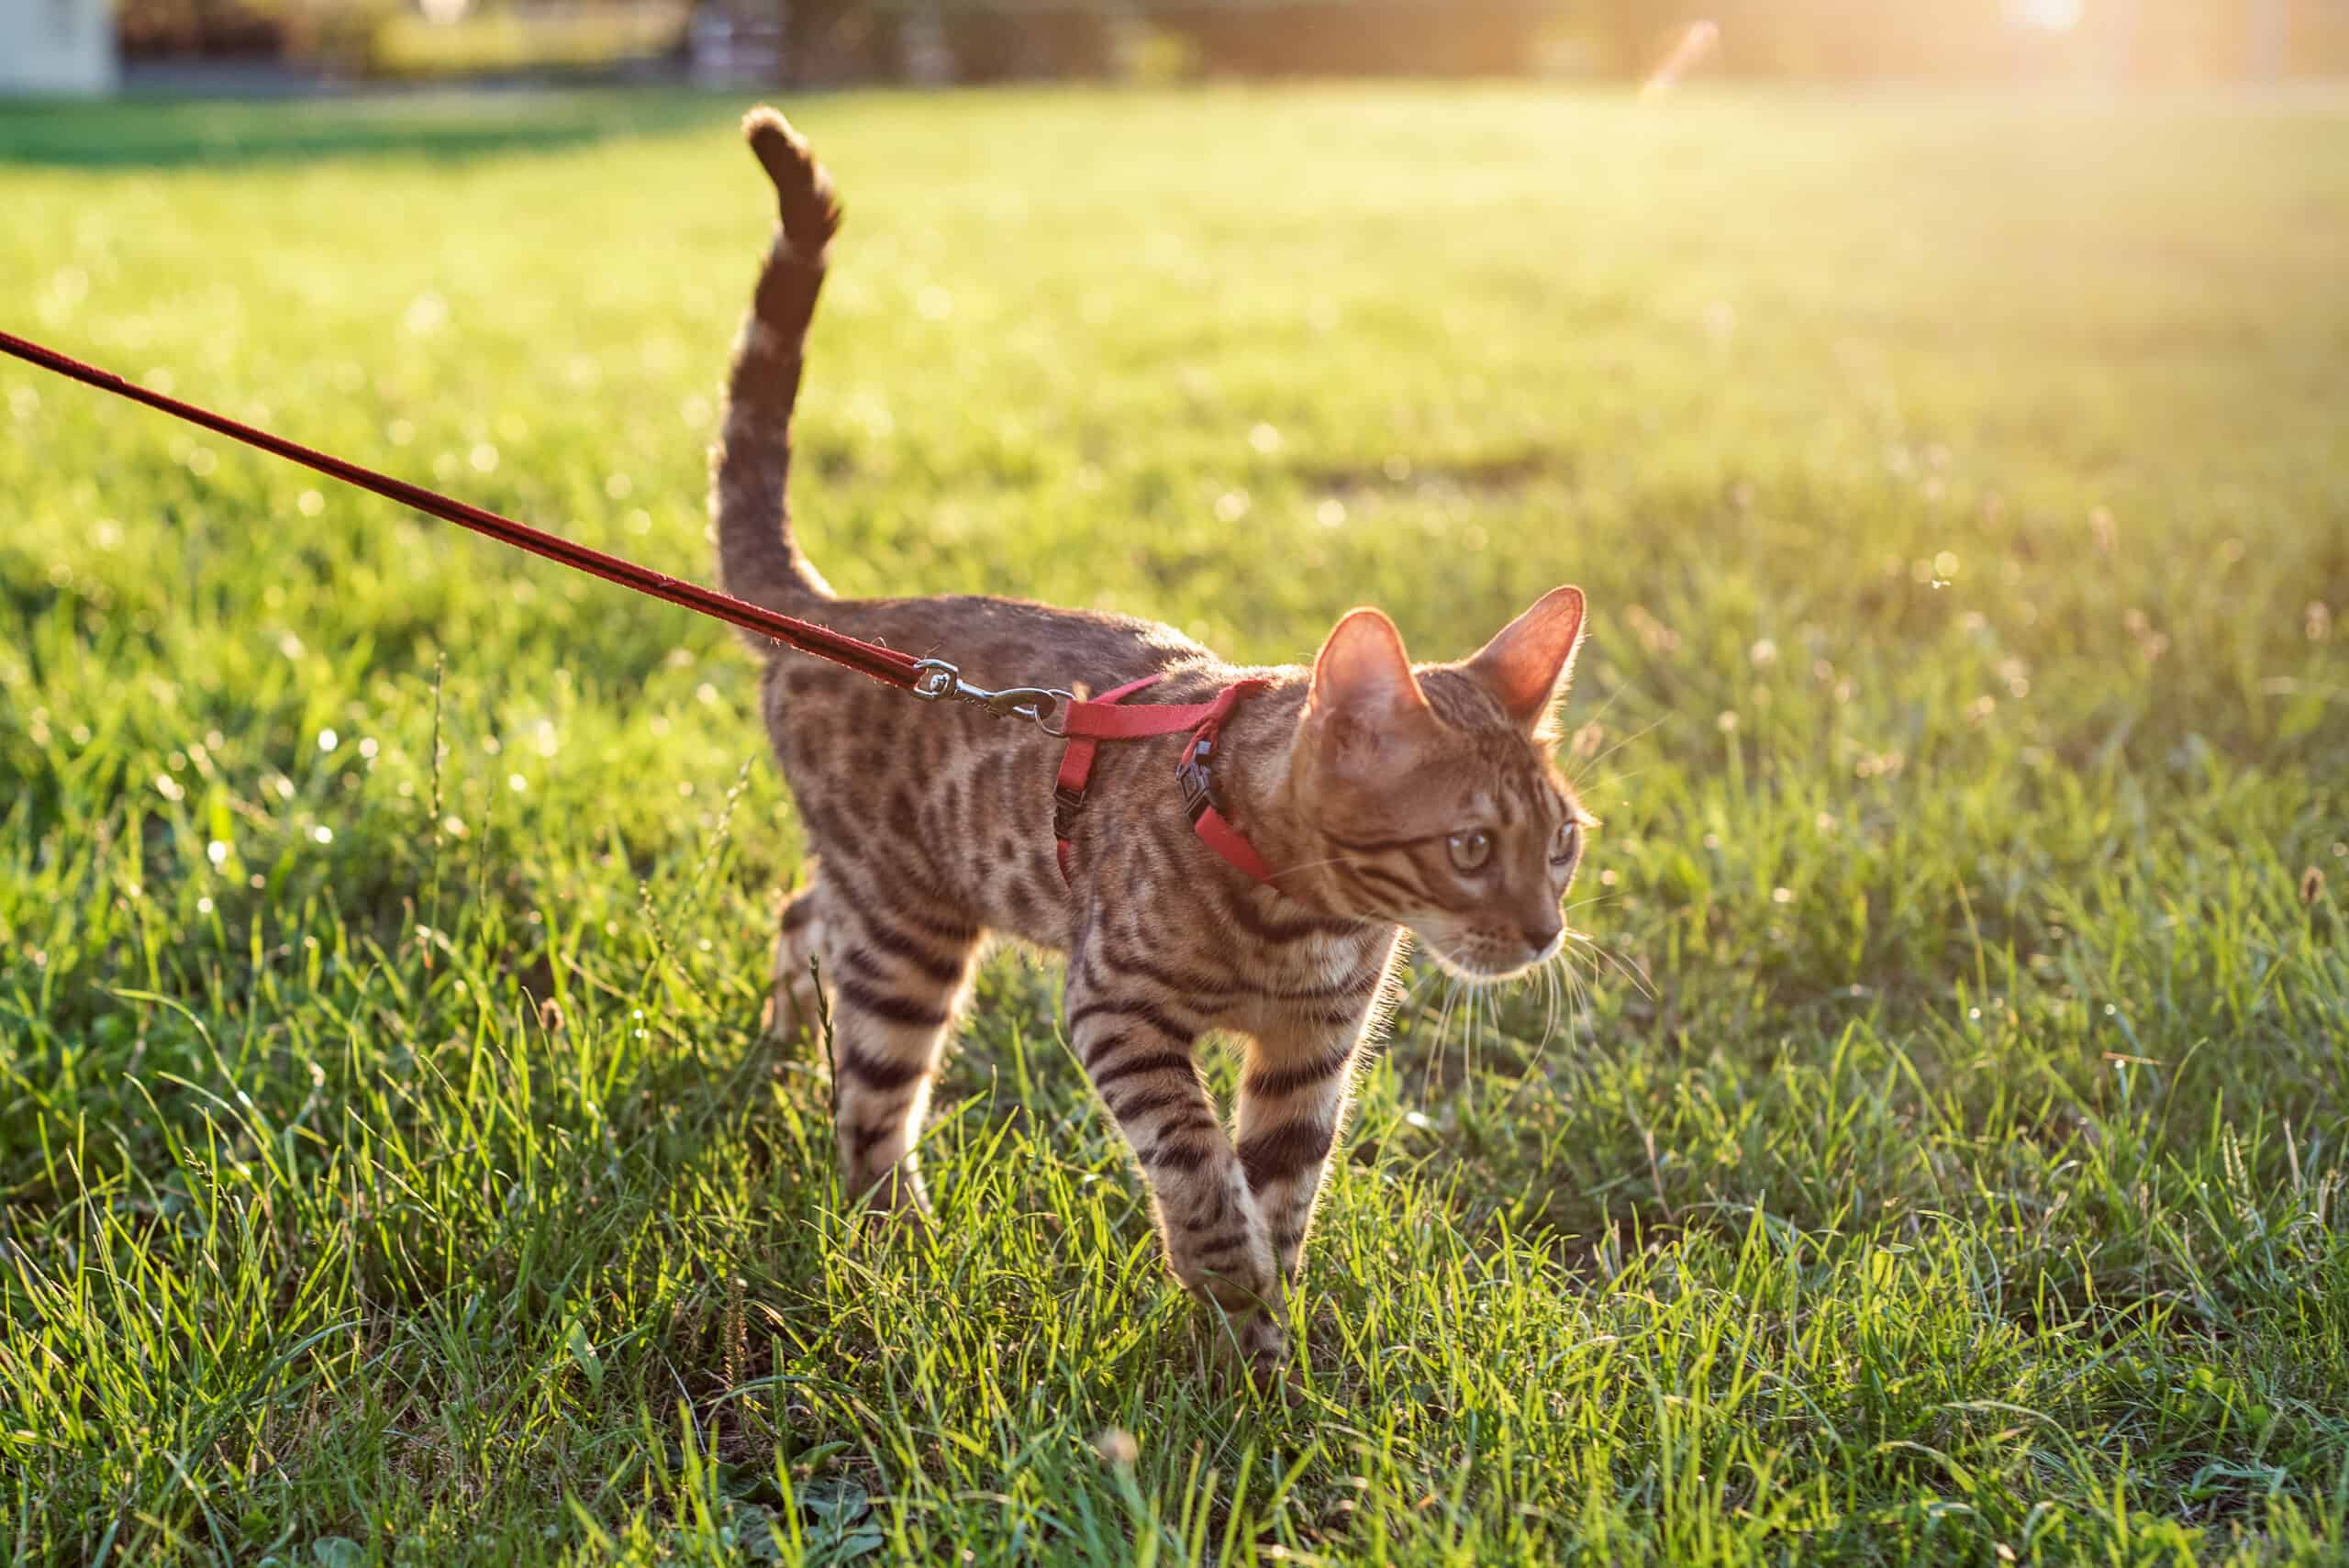 Can You [safely] Take Your Cat On Walks? – 6 Steps To Teaching Your Cat To Walk